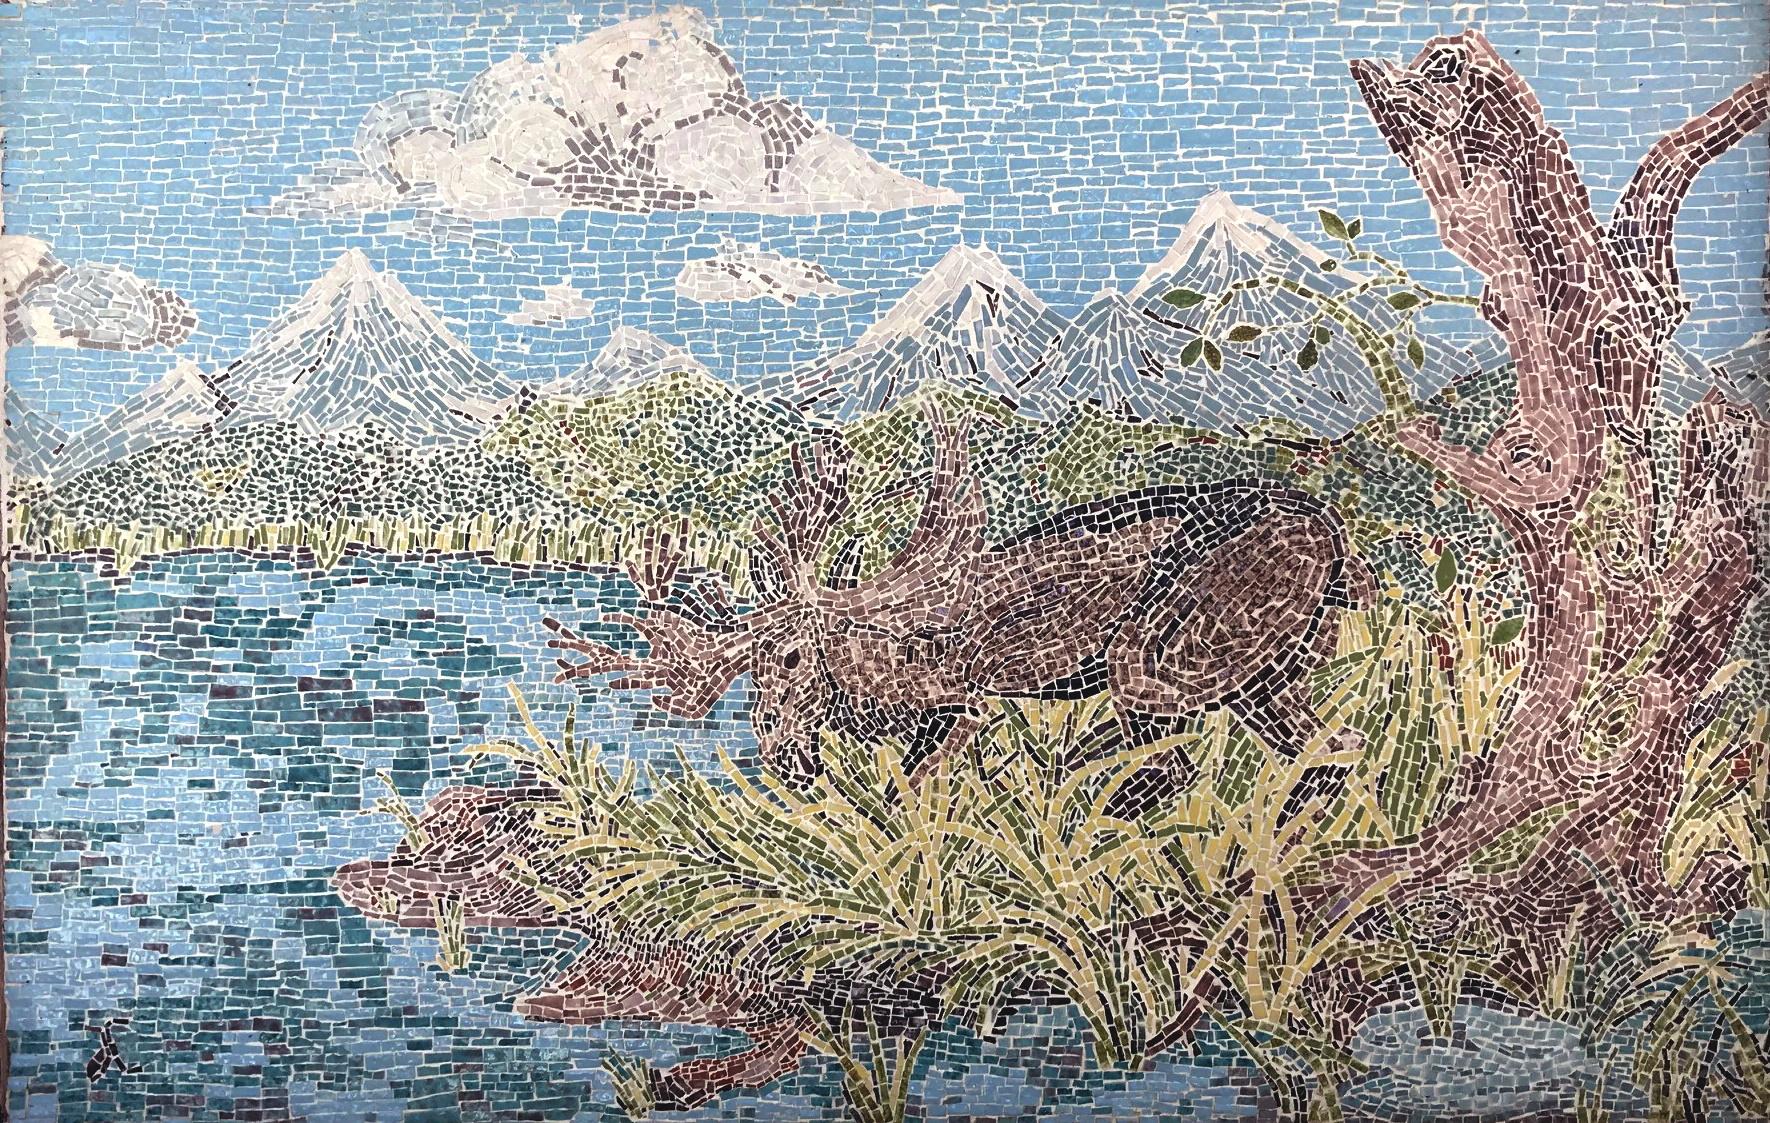 Large American Micromosaic Alaskan landscape, Features Moose

This large scale micromosaic panel is executed with impressive precision. It features a moose in a typical Alaskan landscape. The labor intensive process is clearly displayed in this